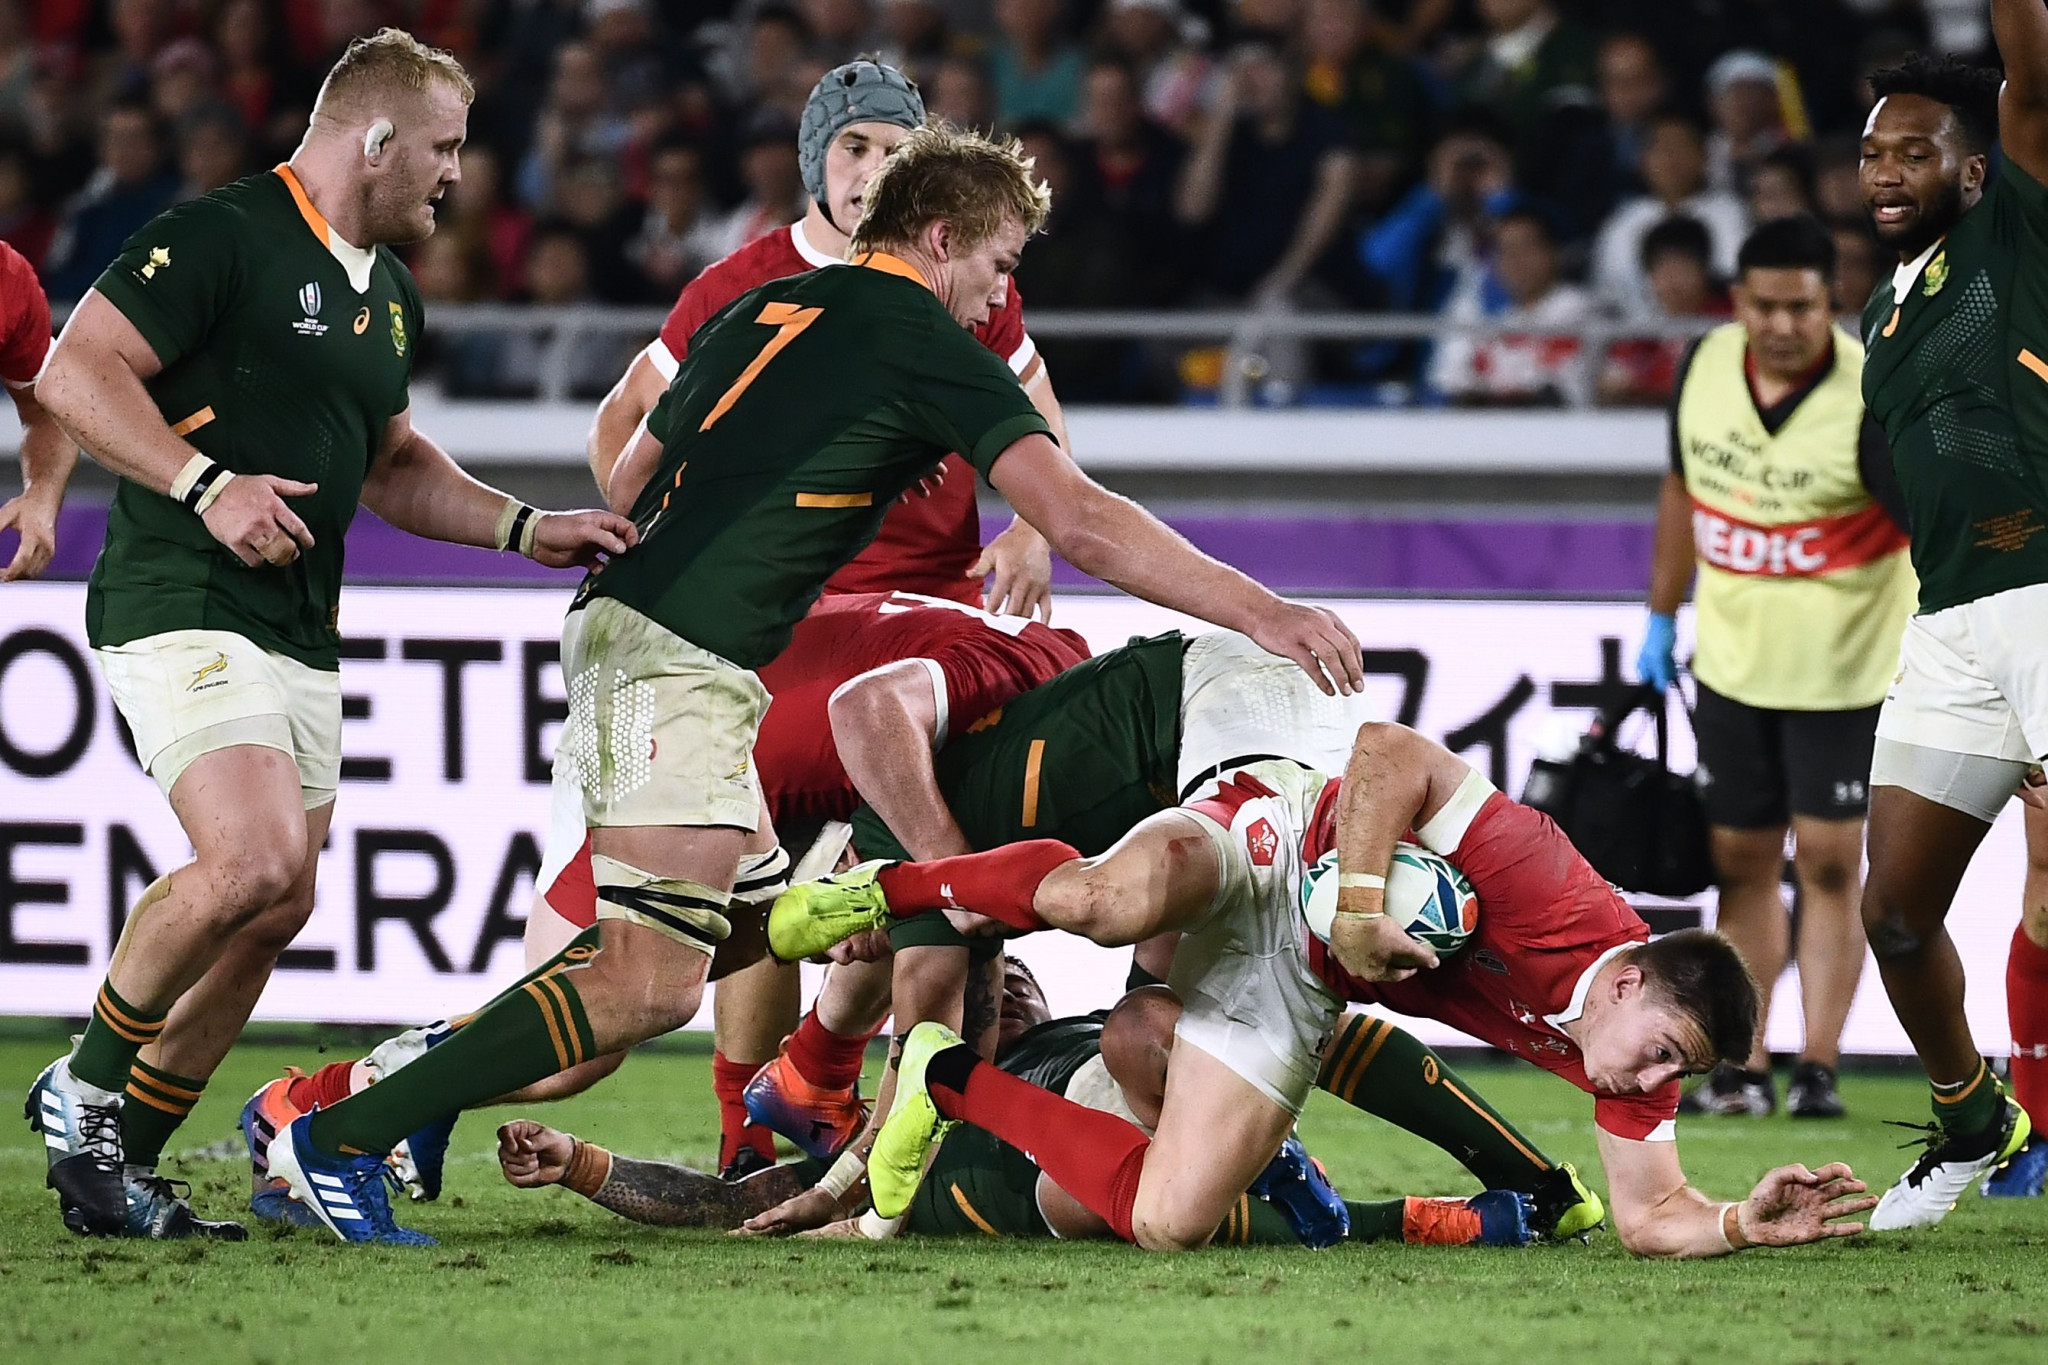 Josh Adams replied for Wales shortly after to set up a tense finale ©Getty Images